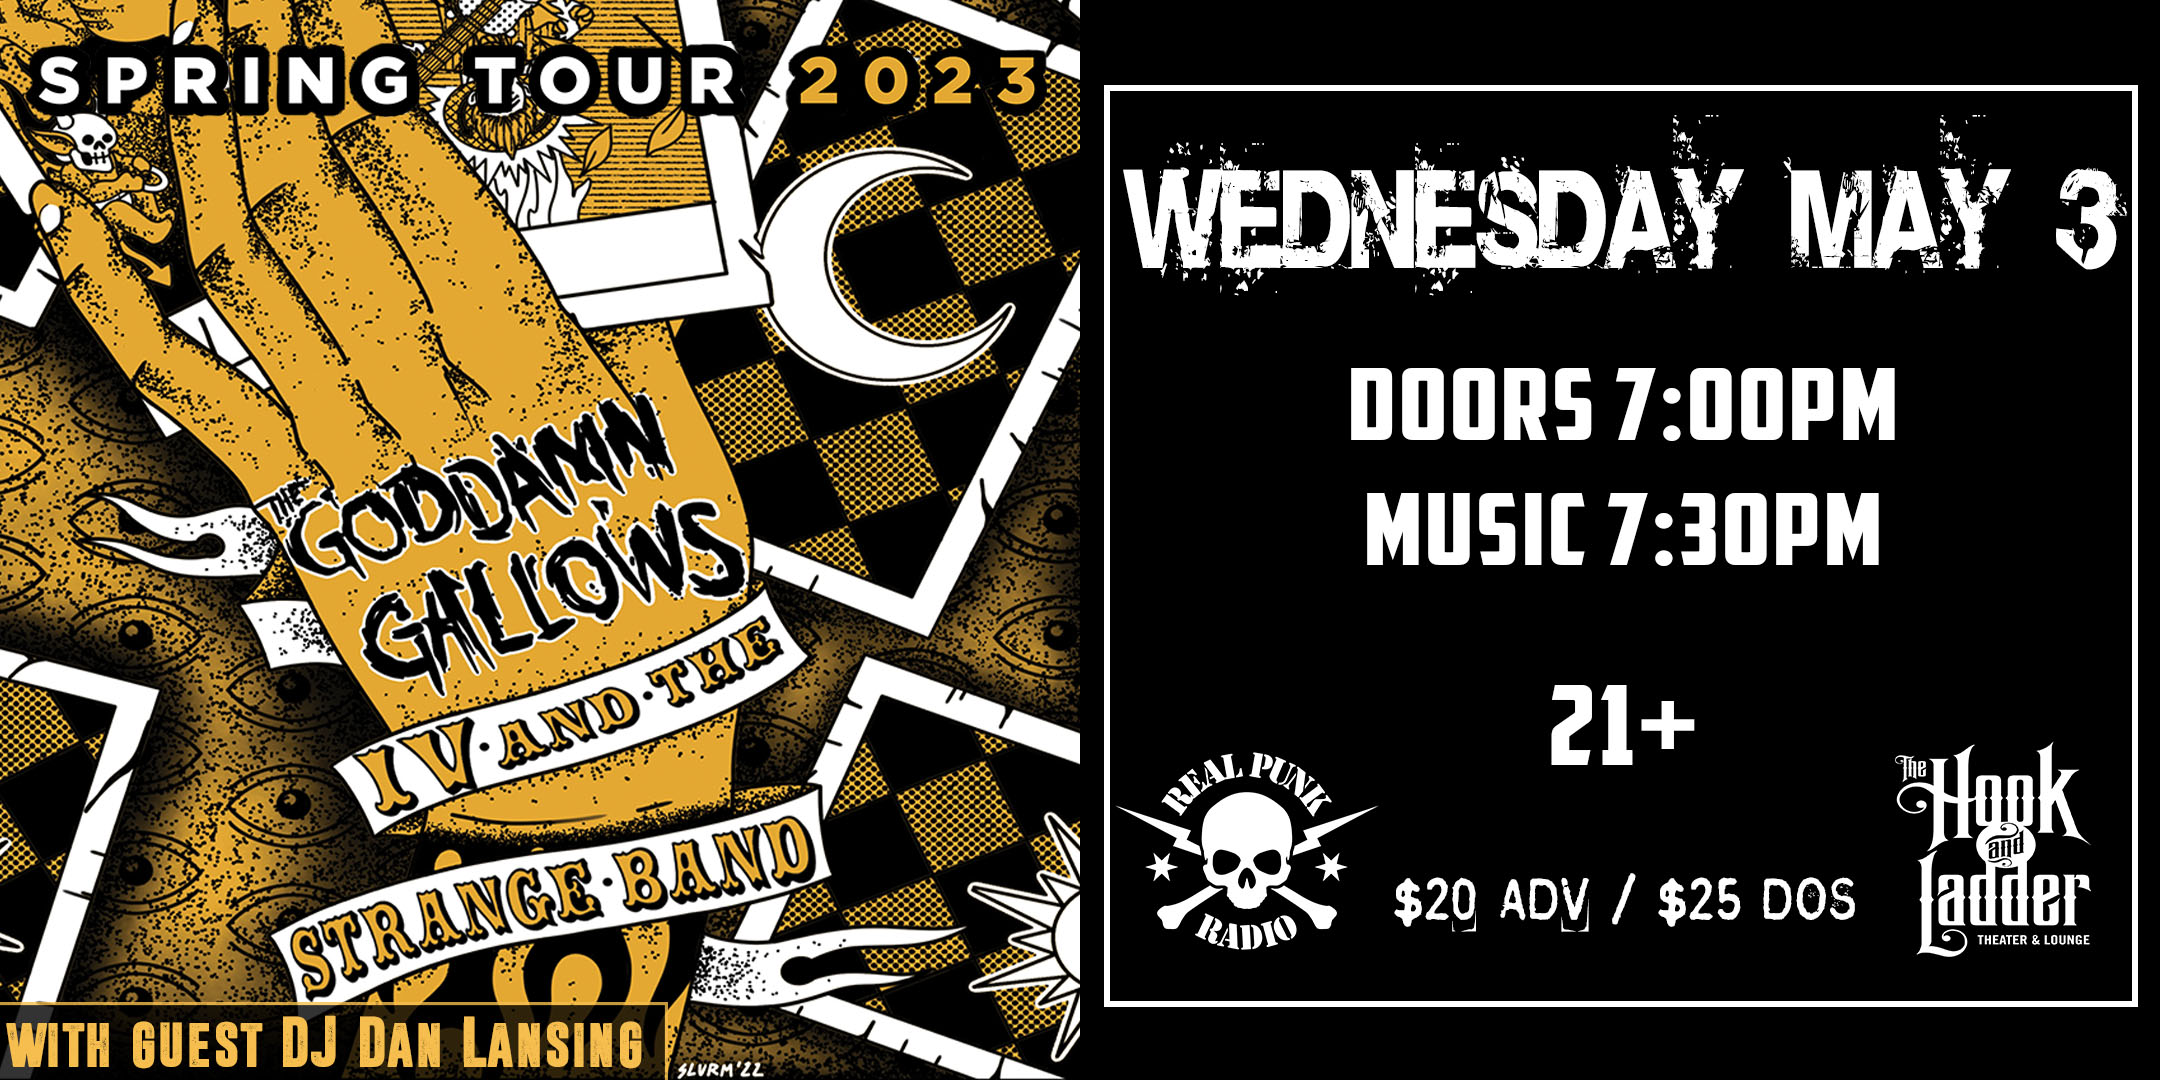 The Goddamn Gallows IV and The Strange Band Spring Tour 2023 with guest DJ Dan Lansing Wednesday May 3 The Hook and Ladder Theater Doors 7:00pm :: Music 7:30pm :: 21+ General Admission*: $20 ADV / $25 DOS